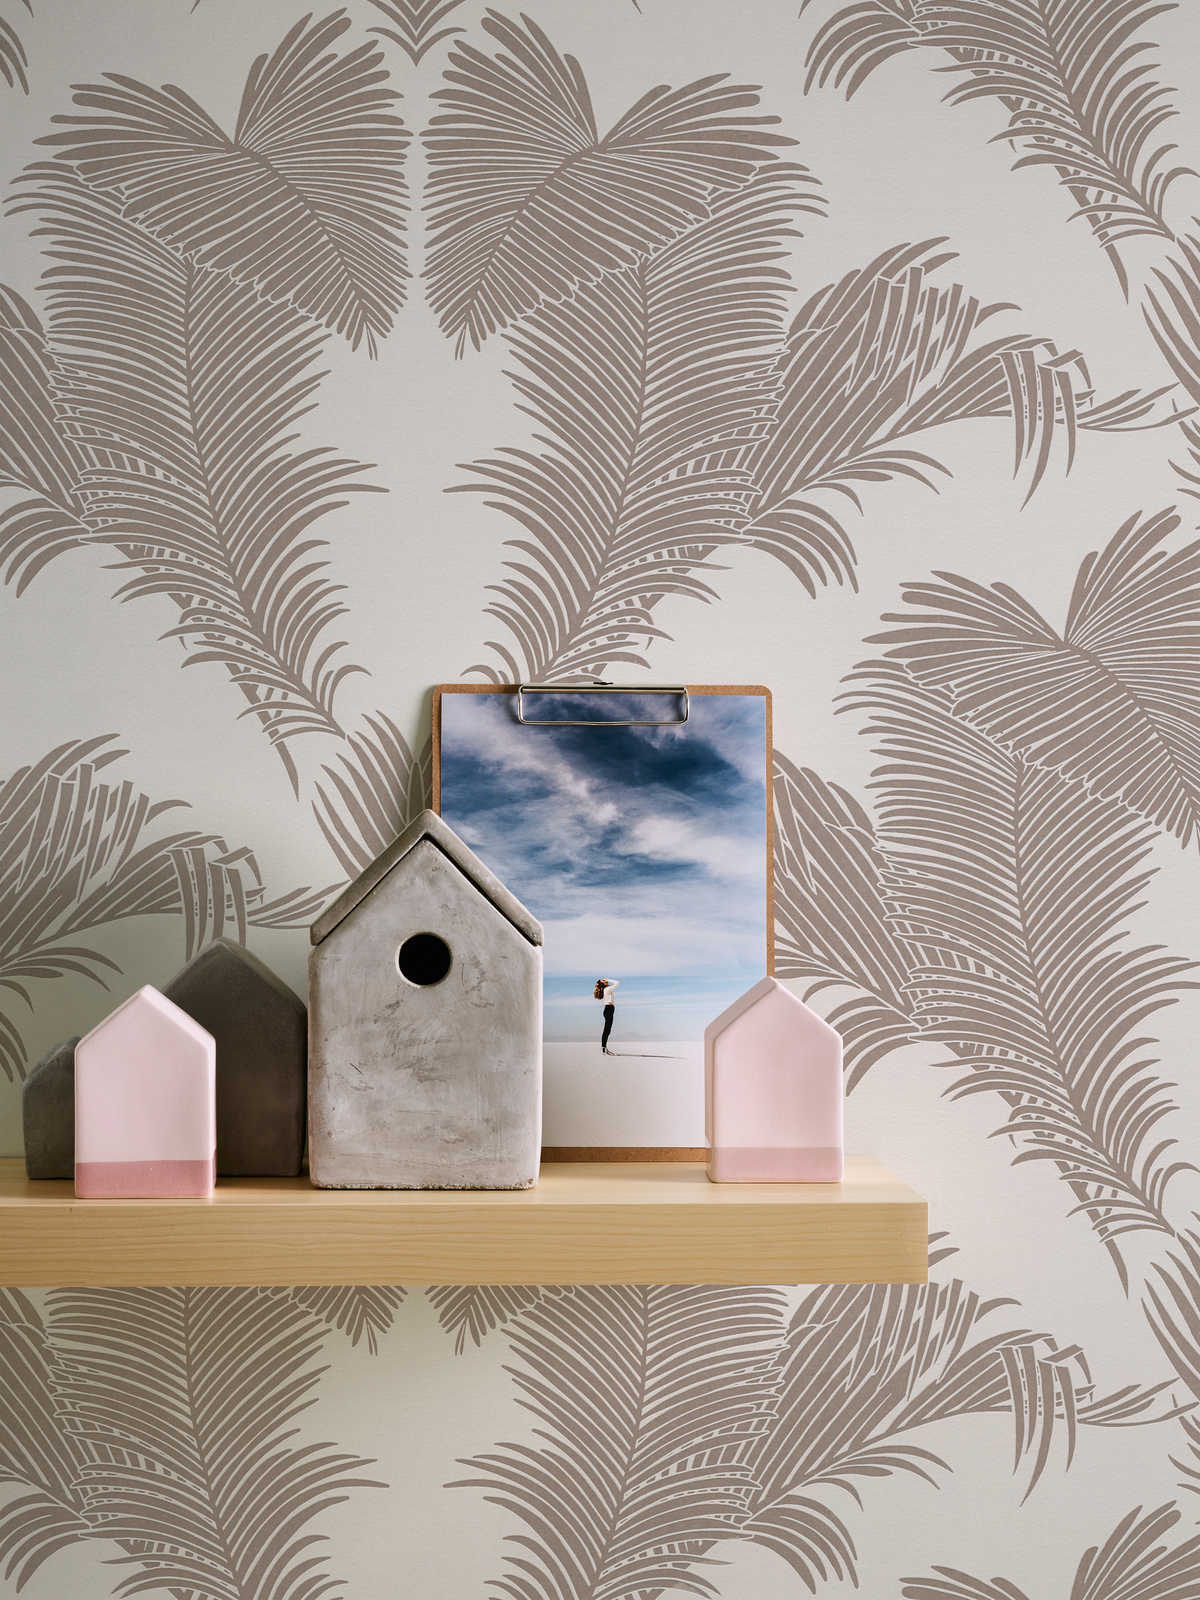             Non-woven wallpaper palm leaves in pink with metallic & matte effect
        